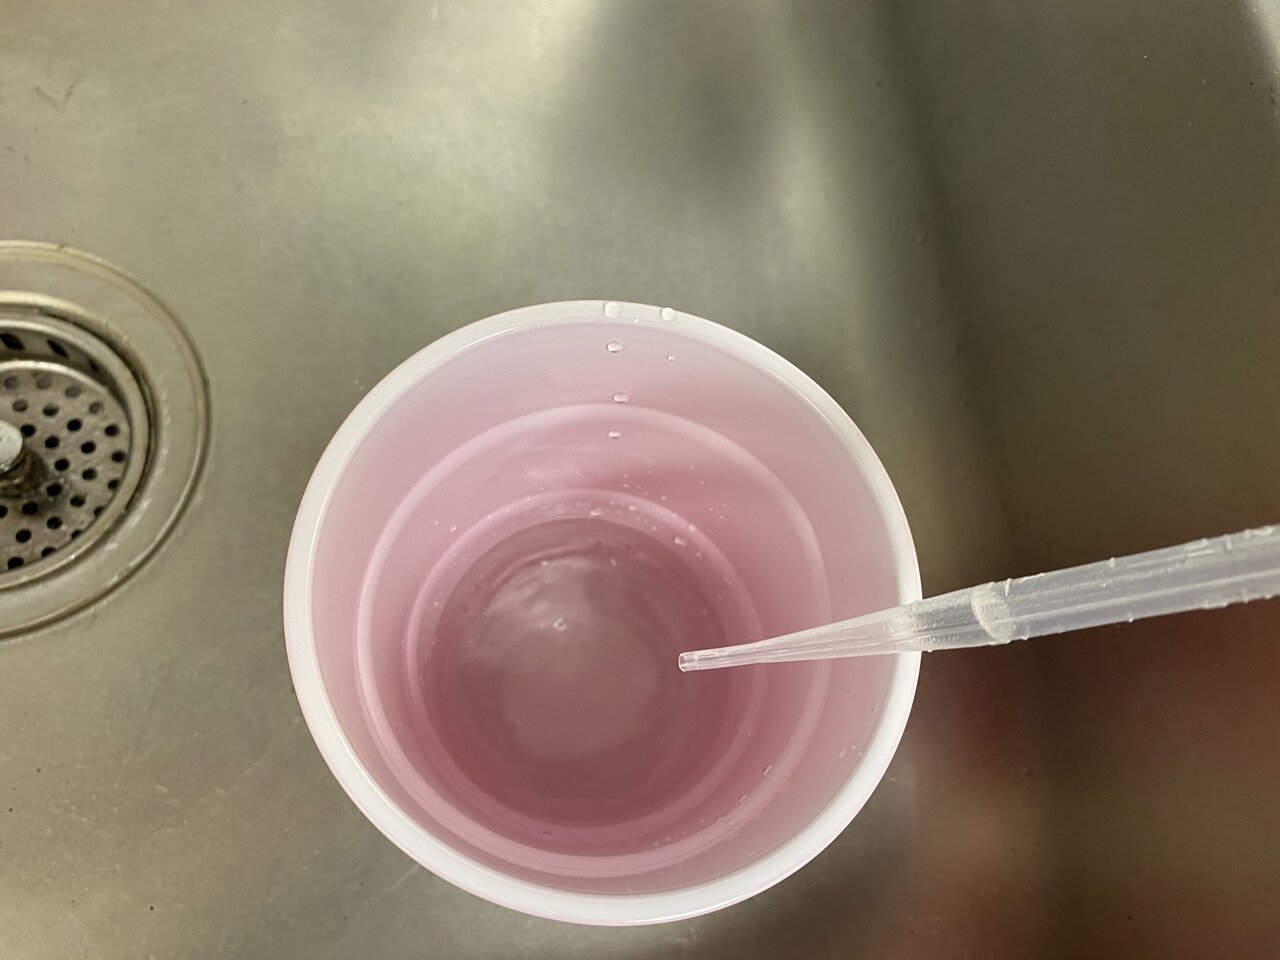 Rinse out the pipette between nutrients